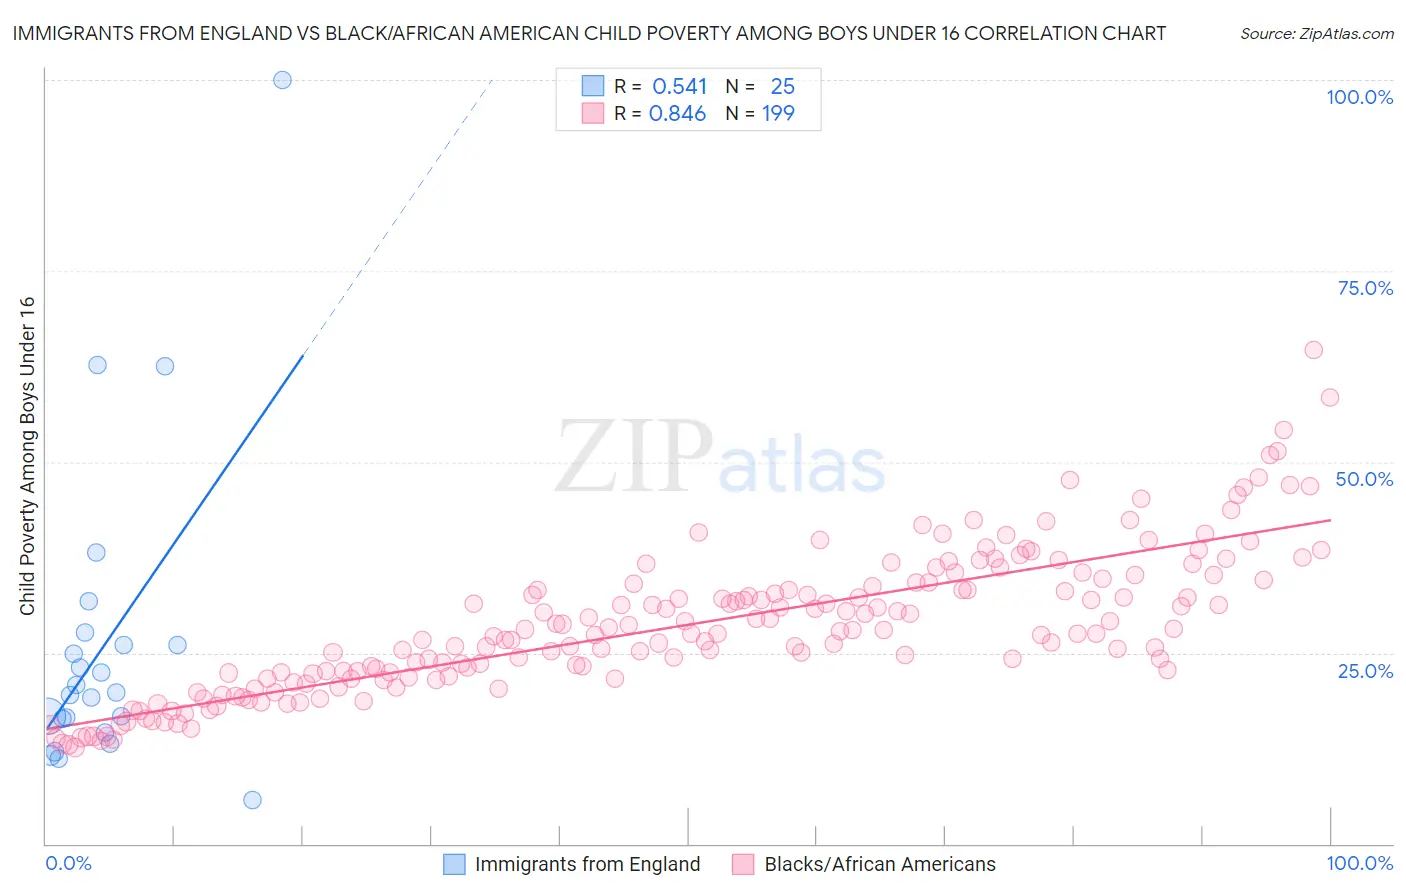 Immigrants from England vs Black/African American Child Poverty Among Boys Under 16